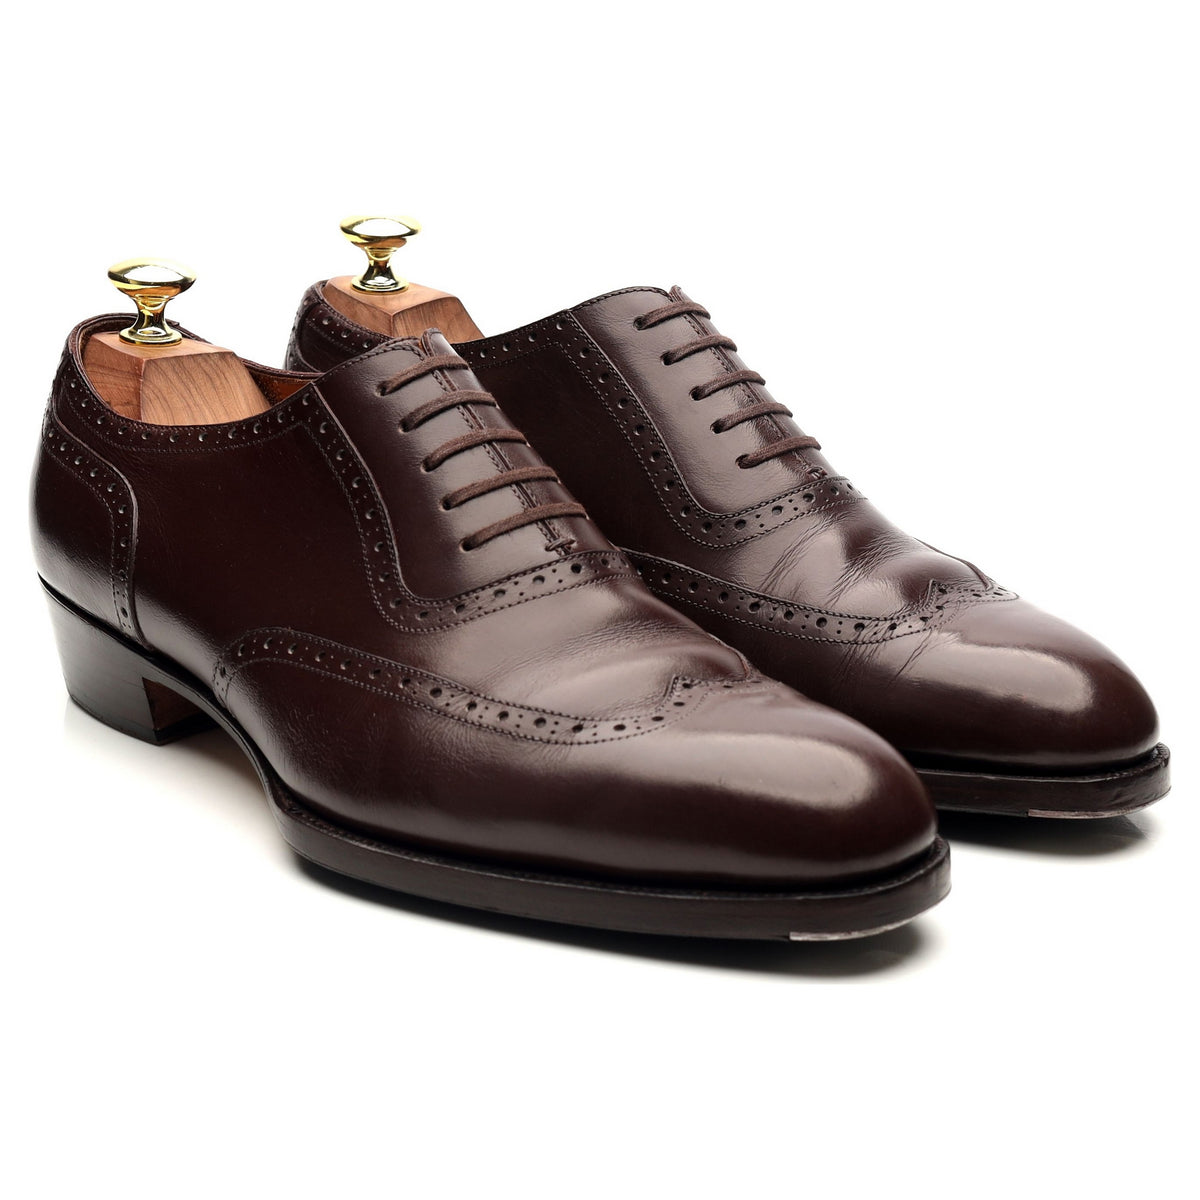 Oct. Tenth Dark Brown Leather Oxford Brogues UK 7.5